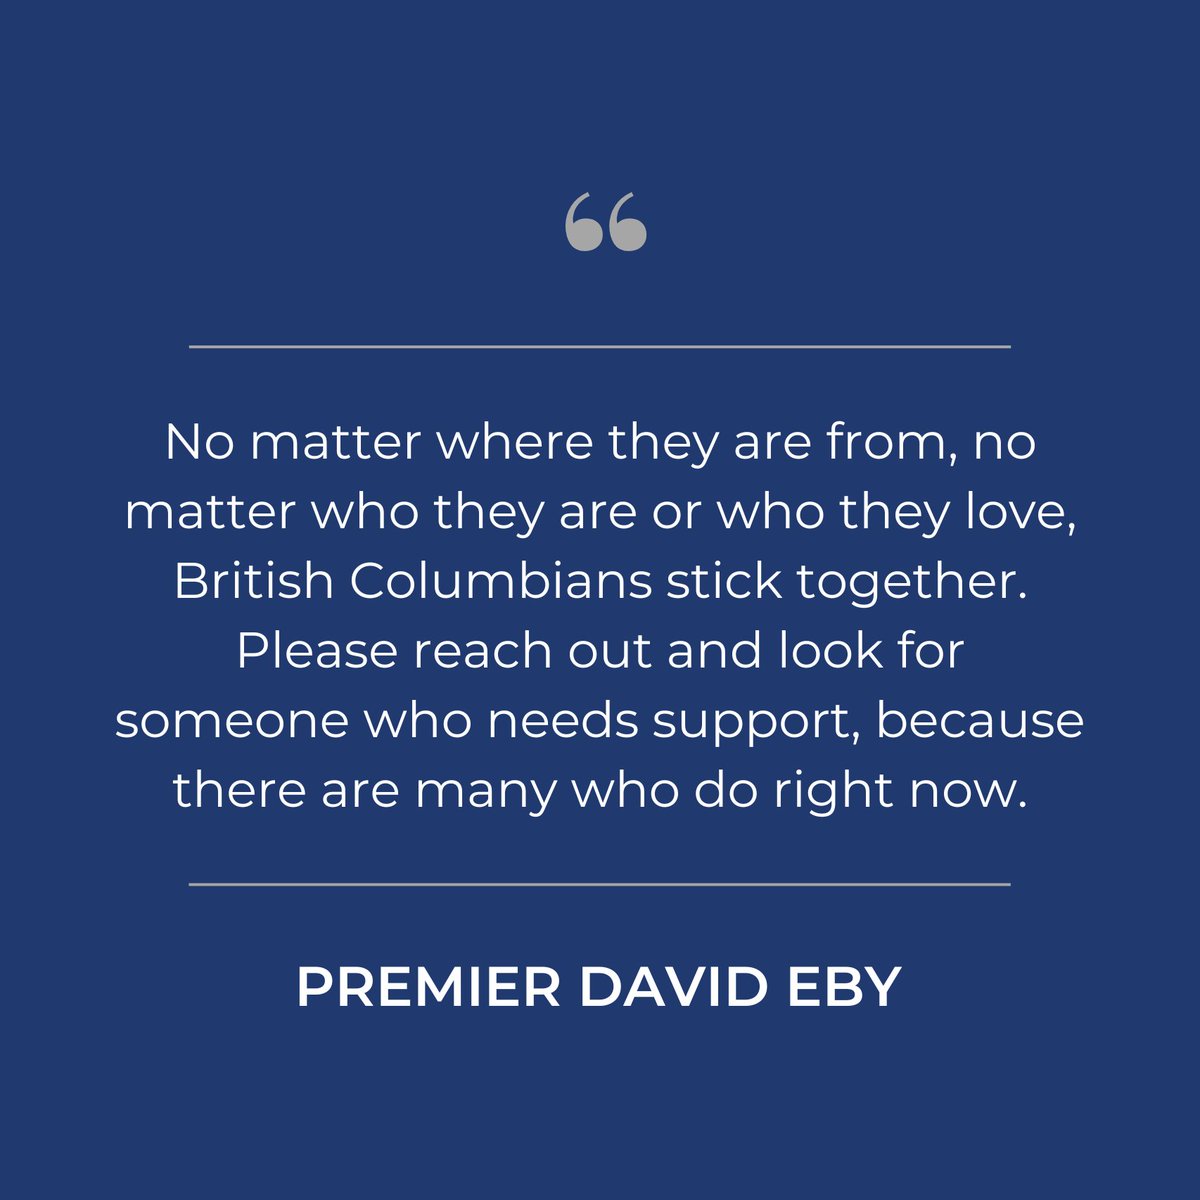 This month, we've seen reprehensible acts of hate in BC. I am hearing about more acts of antisemitism than BC’s Jewish community has seen in a generation, including the vandalism of a rabbi’s home and two Jewish women threatened with violence following a peaceful rally. (1/6)